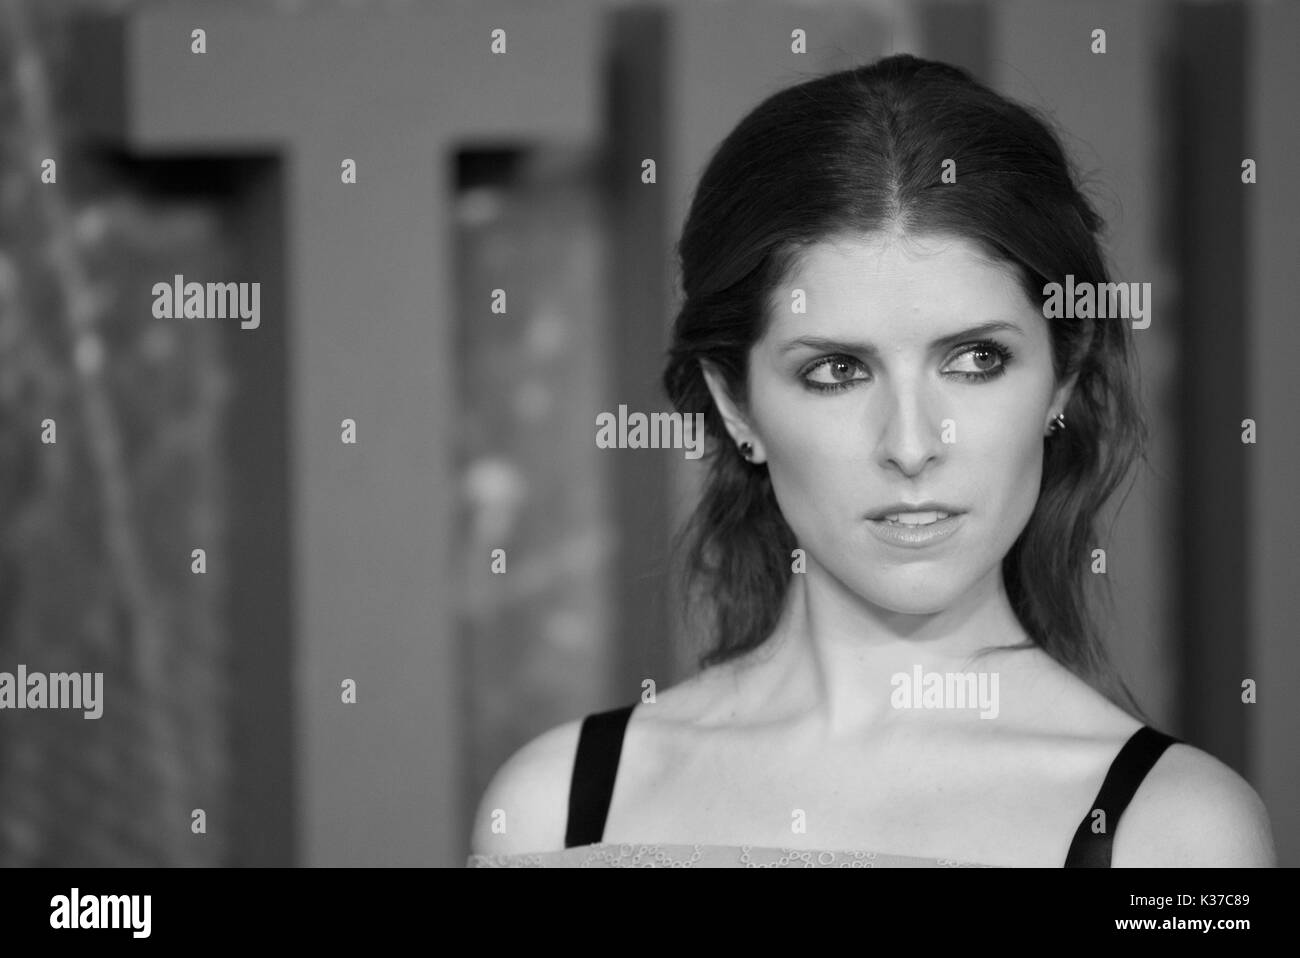 Anna kendrick Black and White Stock Photos & Images - Alamy